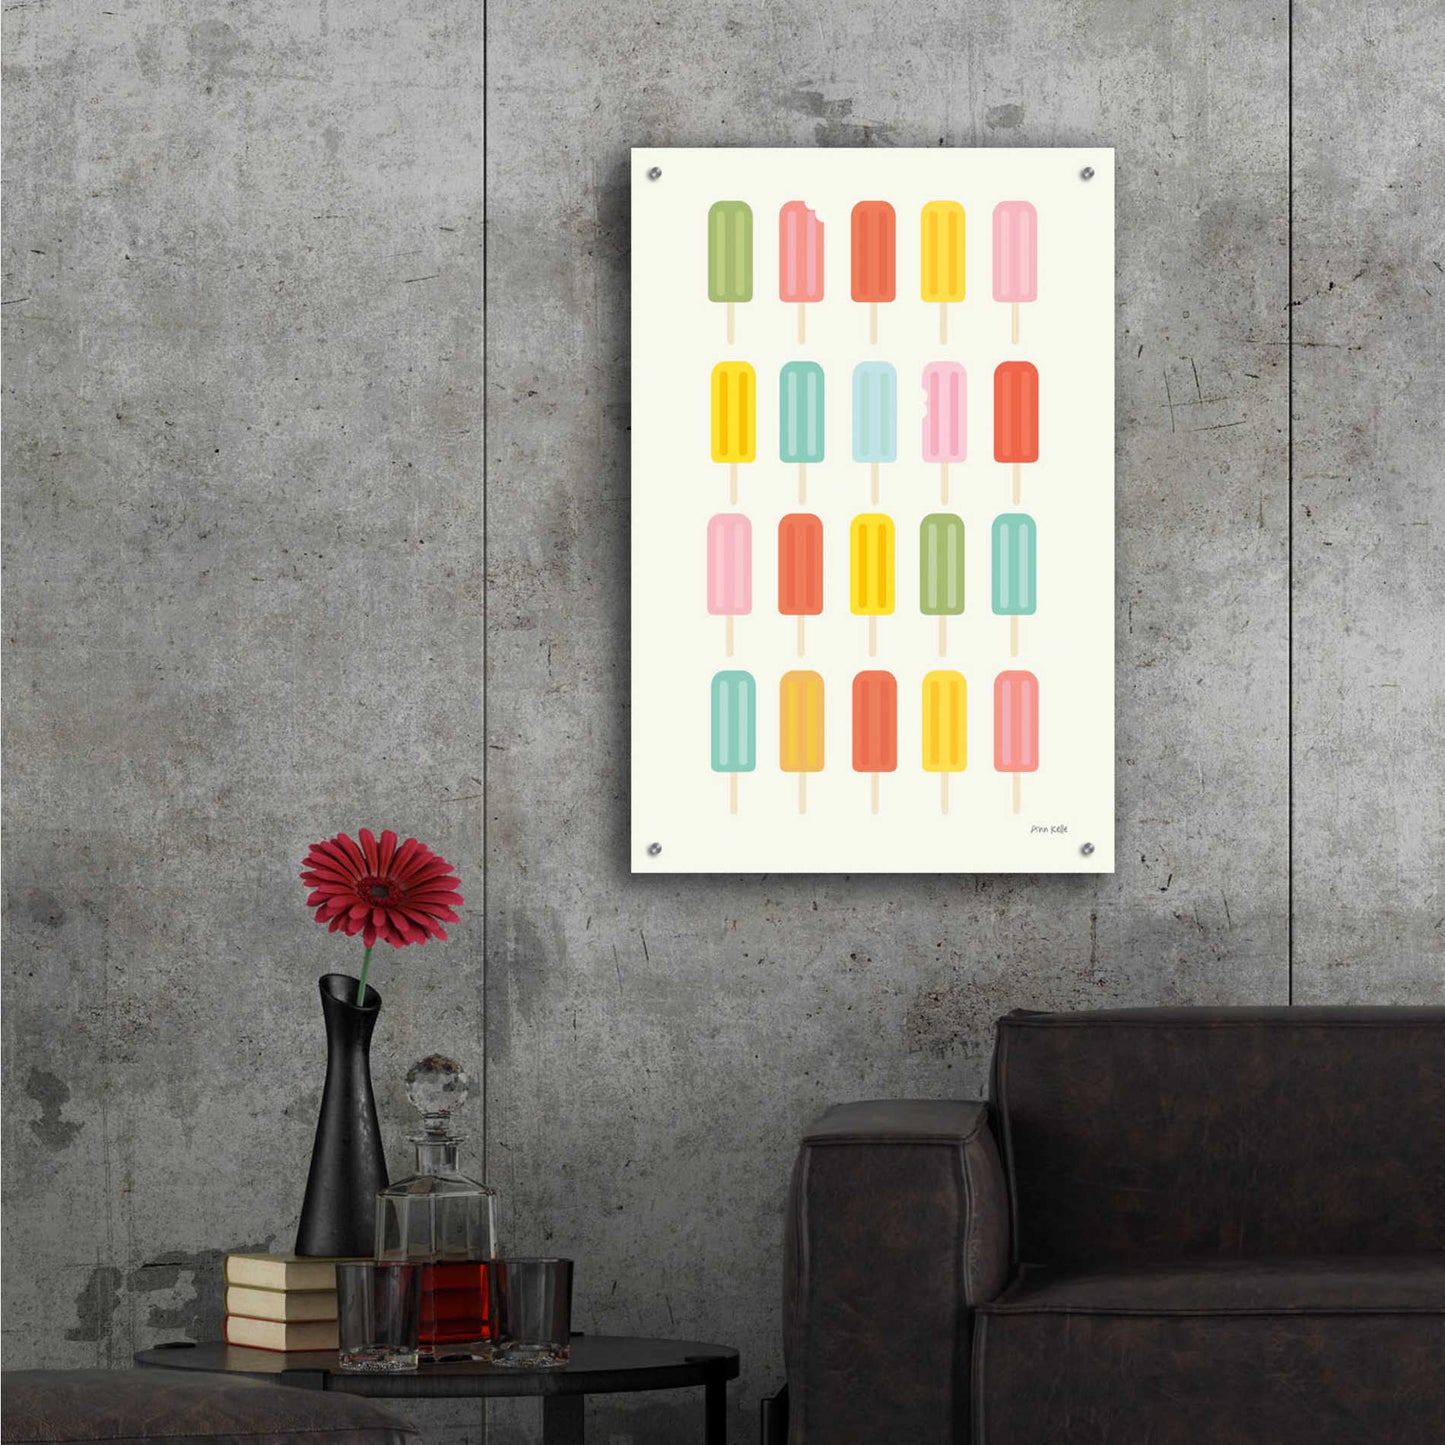 Epic Art 'Colorful Popsicles' by Ann Kelle Designs, Acrylic Glass Wall Art,24x36